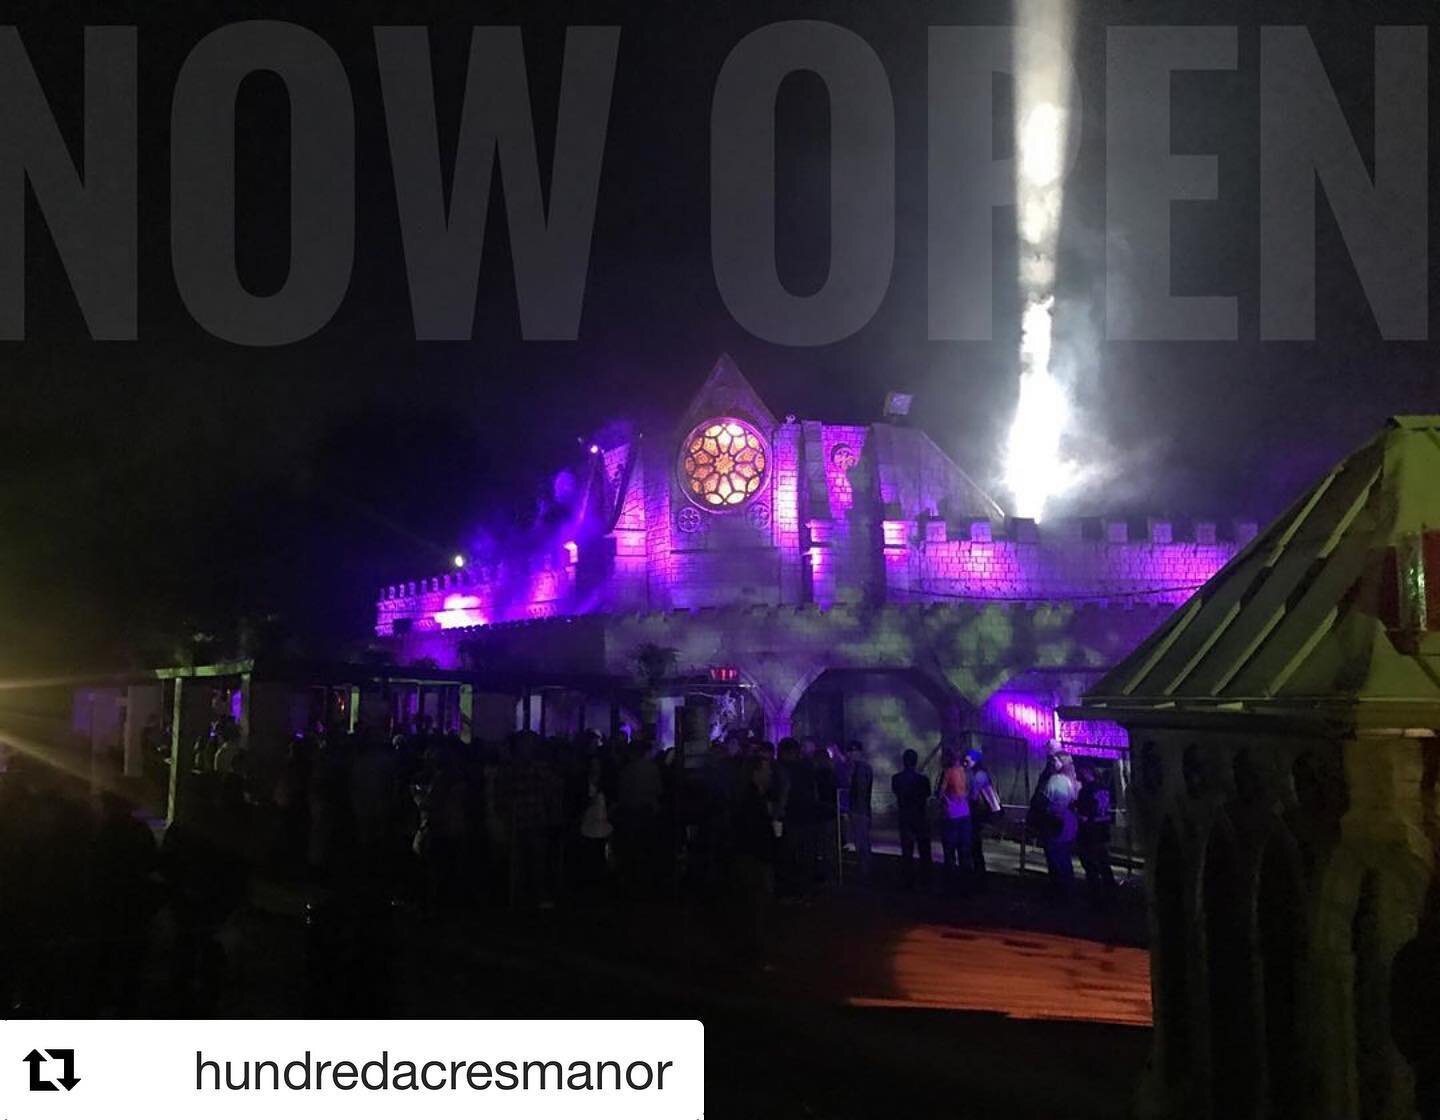 Hundred Acres Manor haunted attraction in Pittsburgh, PA is now open! This year we had the pleasure to redesign and build their new attraction &ldquo;The Lift&rdquo;. We wish their cast and crew a successful 2019 season! 
If you happen to be in the P